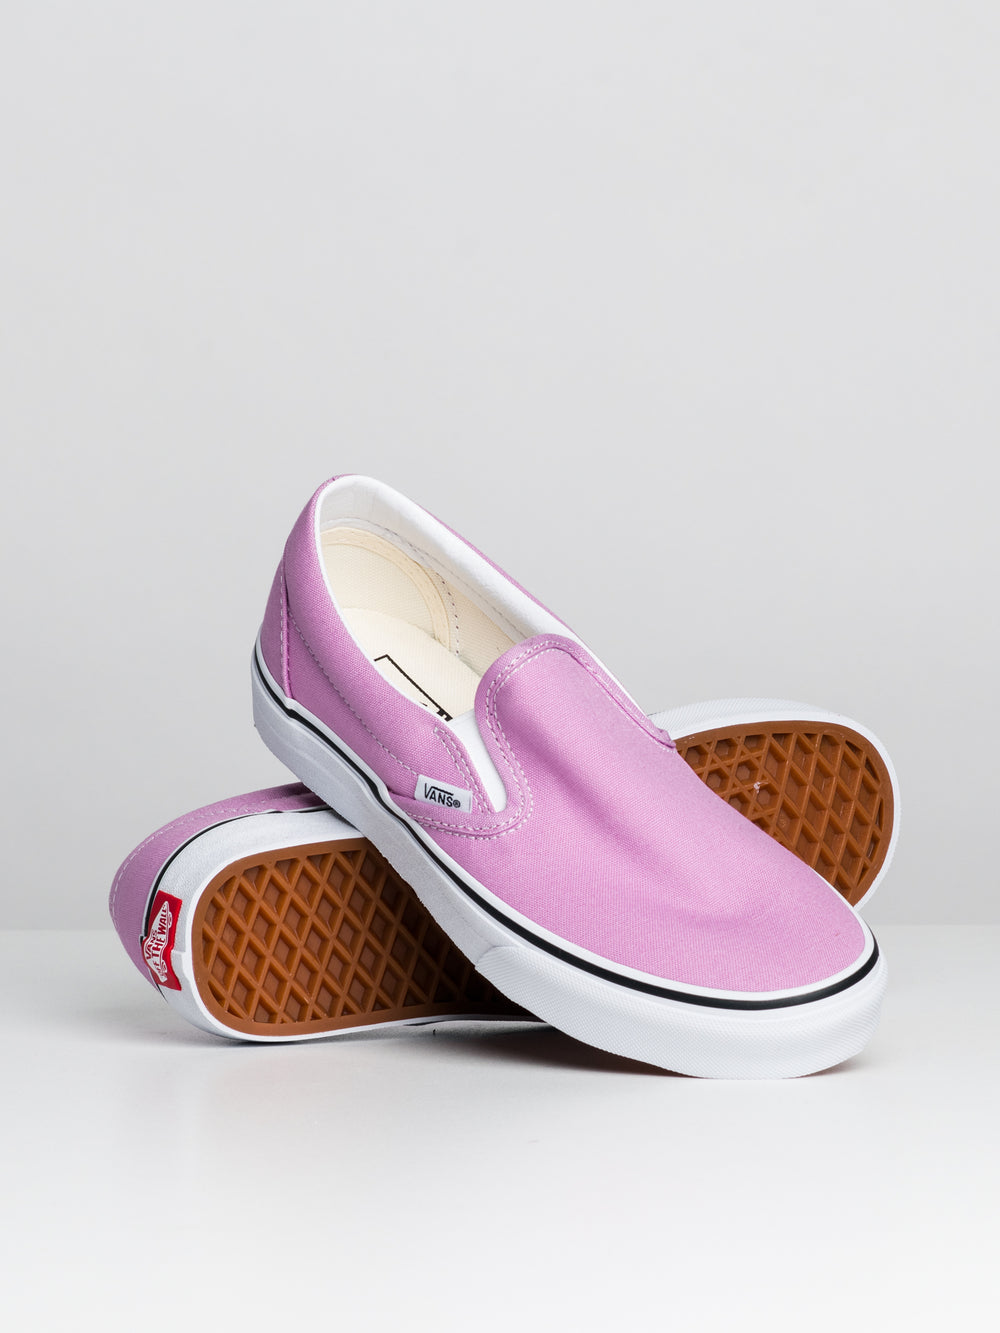 WOMENS VANS CLASSIC SLIP-ON - CLEARANCE